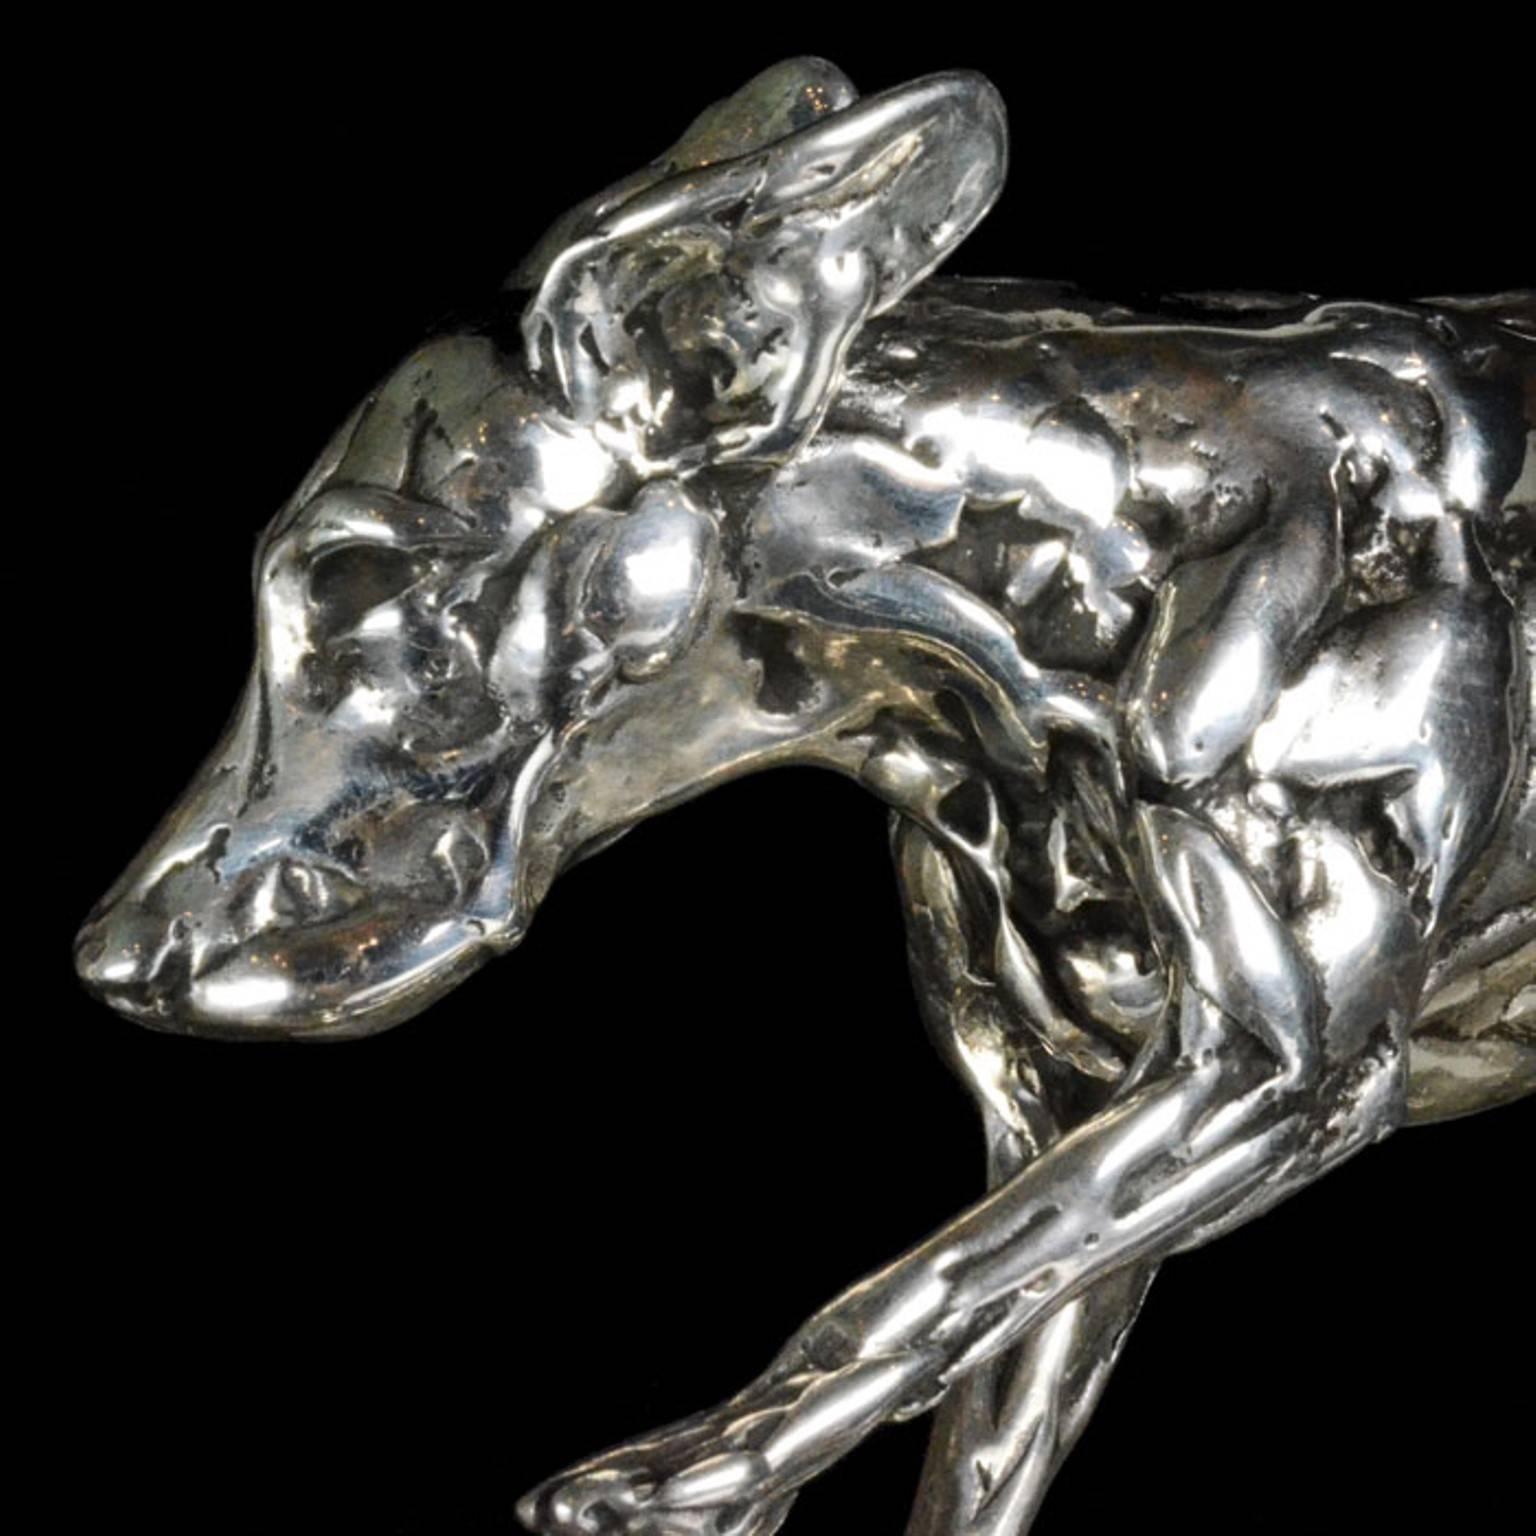  Lucy Kinsella  'Running Hound' sterling silver sculpture  2